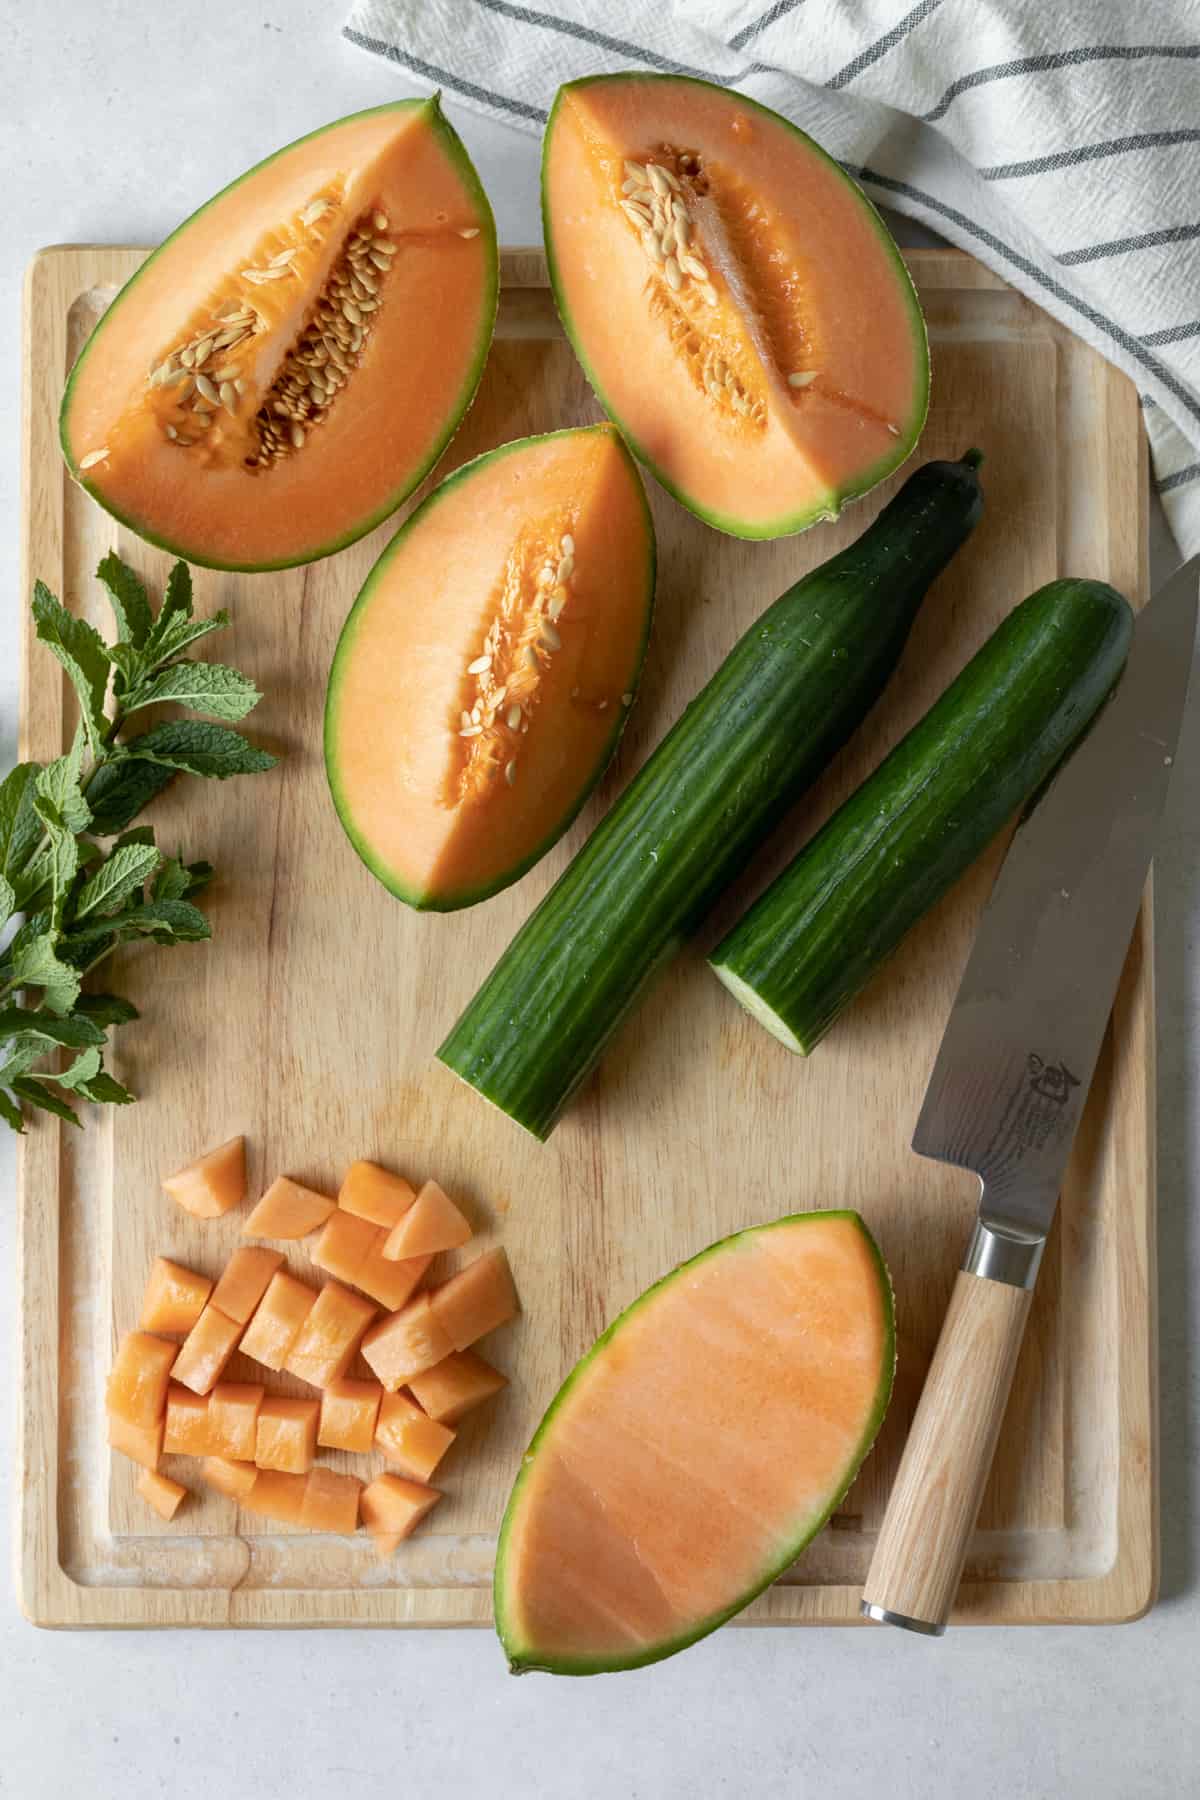 cantaloupe and cucumber on cutting board with a knife, demonstrating size of cubed melon.